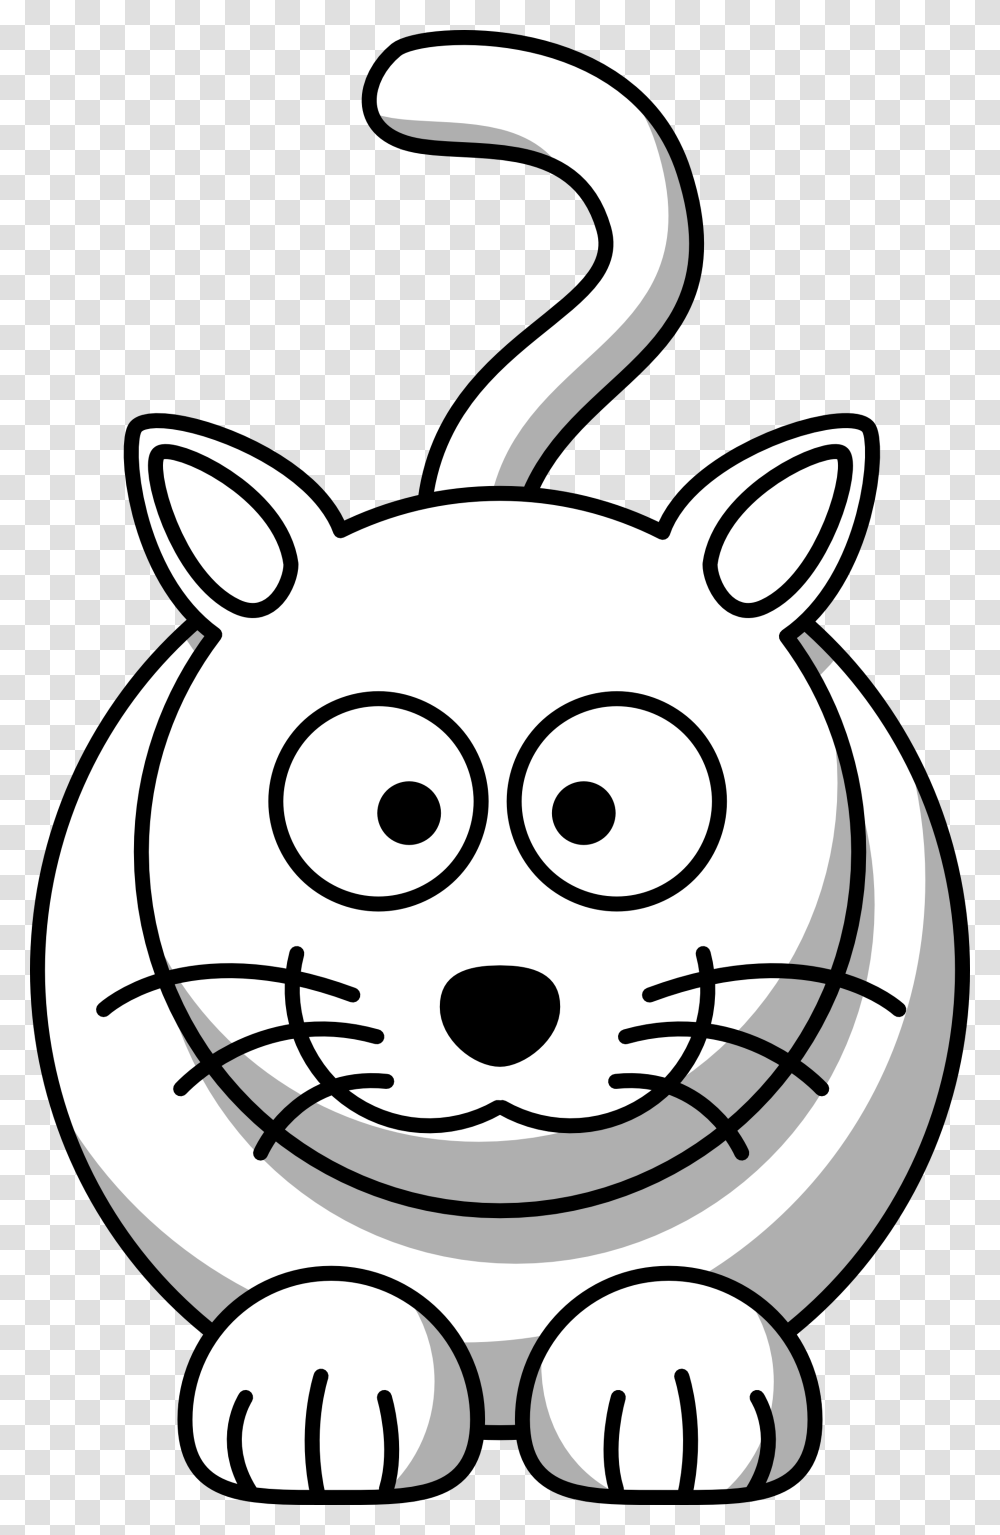 Black And White Cartoon Animals Clipart Free To Use Clip Art, Stencil, Piggy Bank Transparent Png